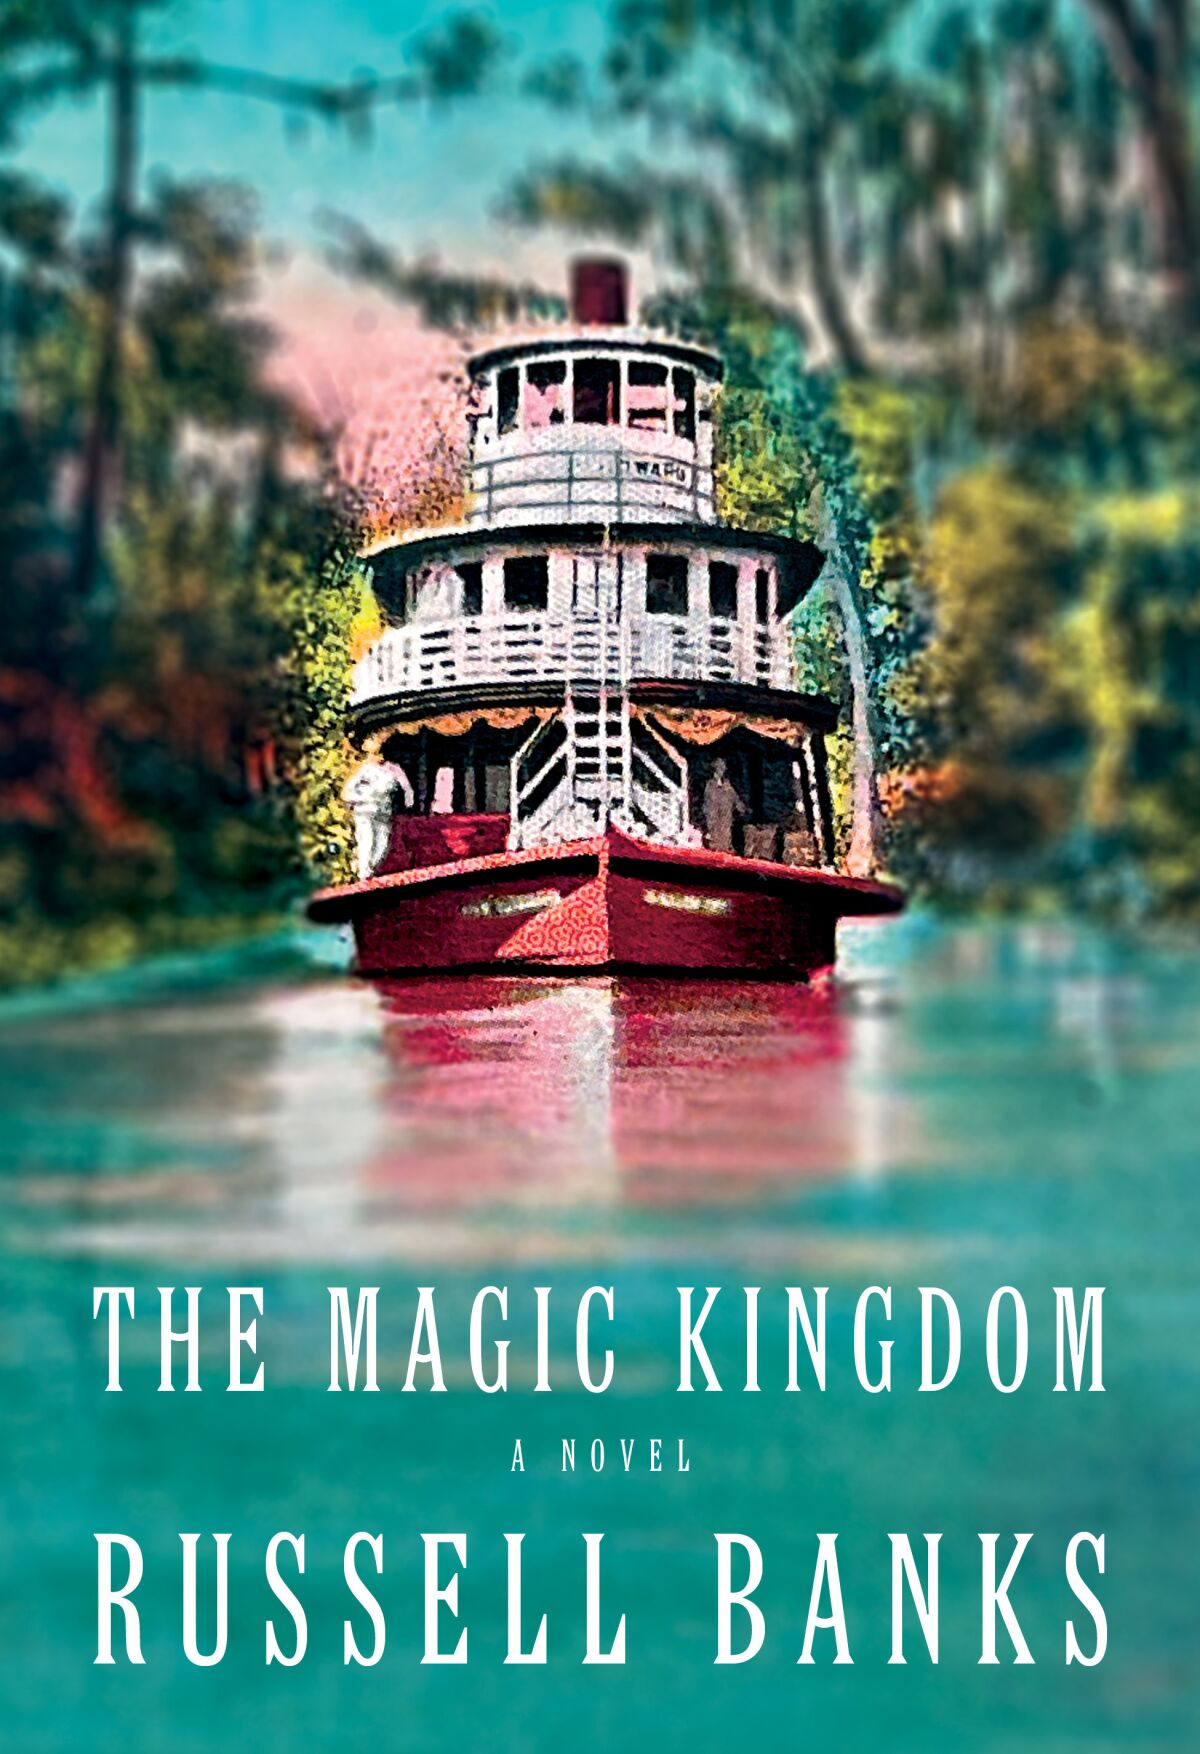 "The Magic Kingdom" by Russell Banks